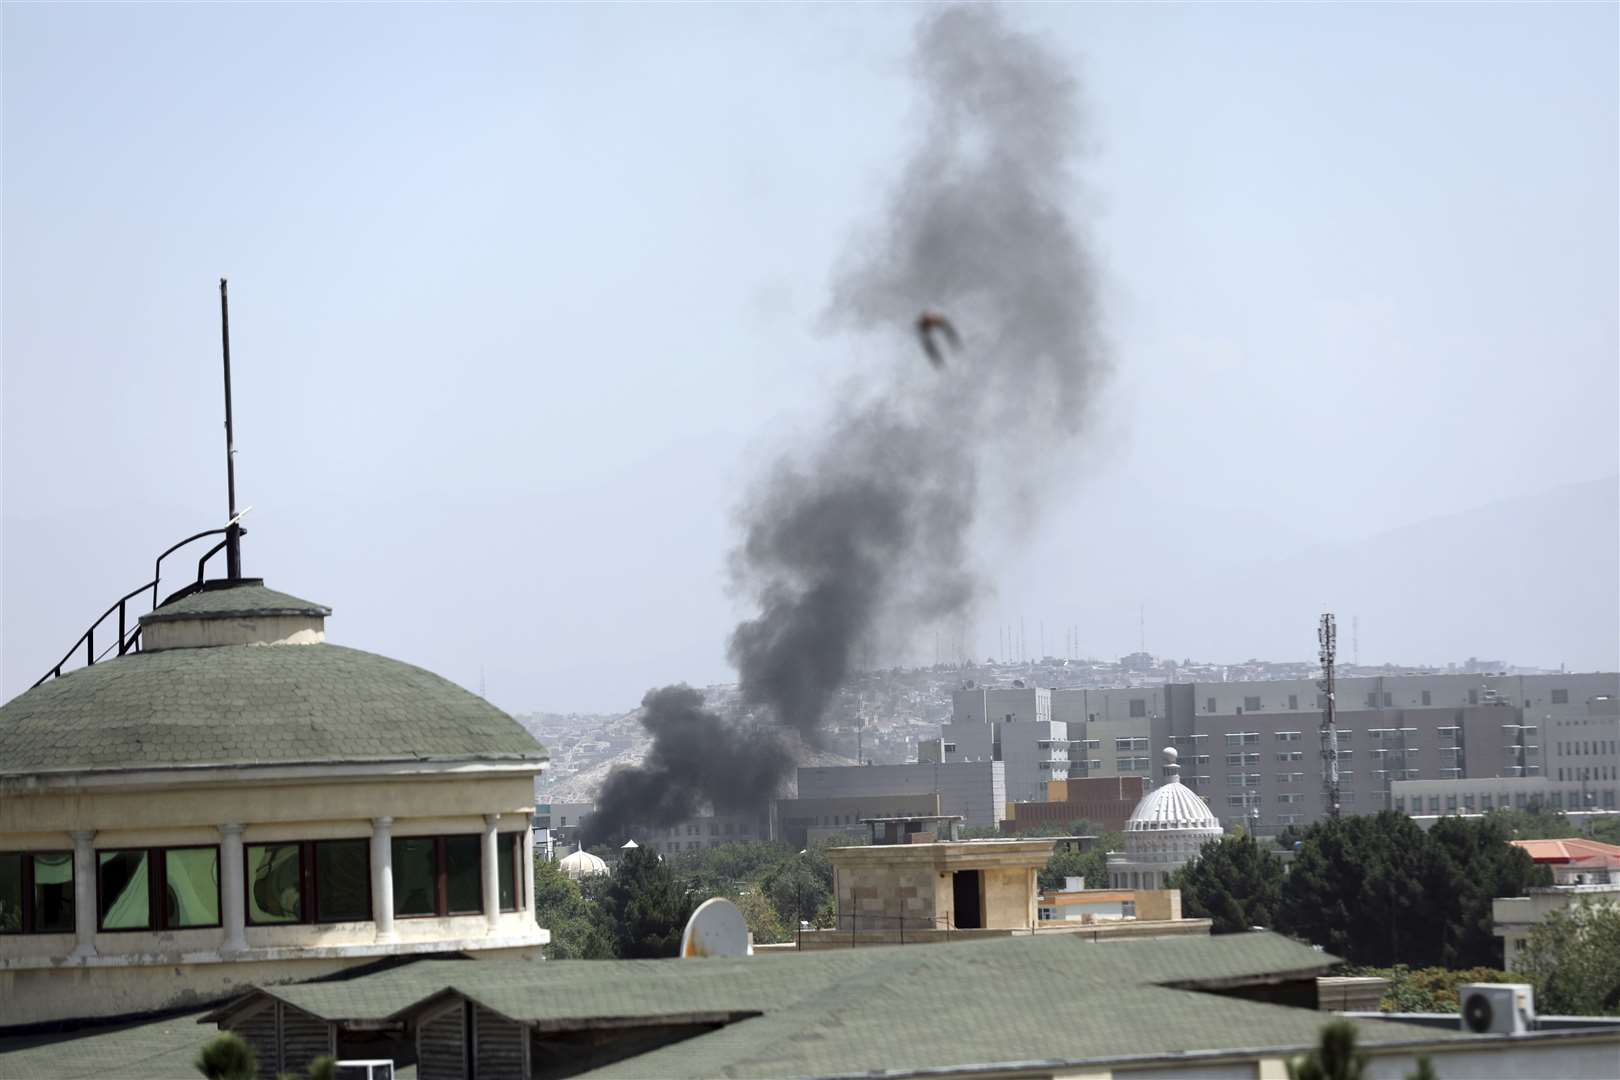 Smoke rises next to the US embassy in Kabul, Afghanistan, on August 15 2021 as officials burn sensitive documents (Rahmat Gul/AP)